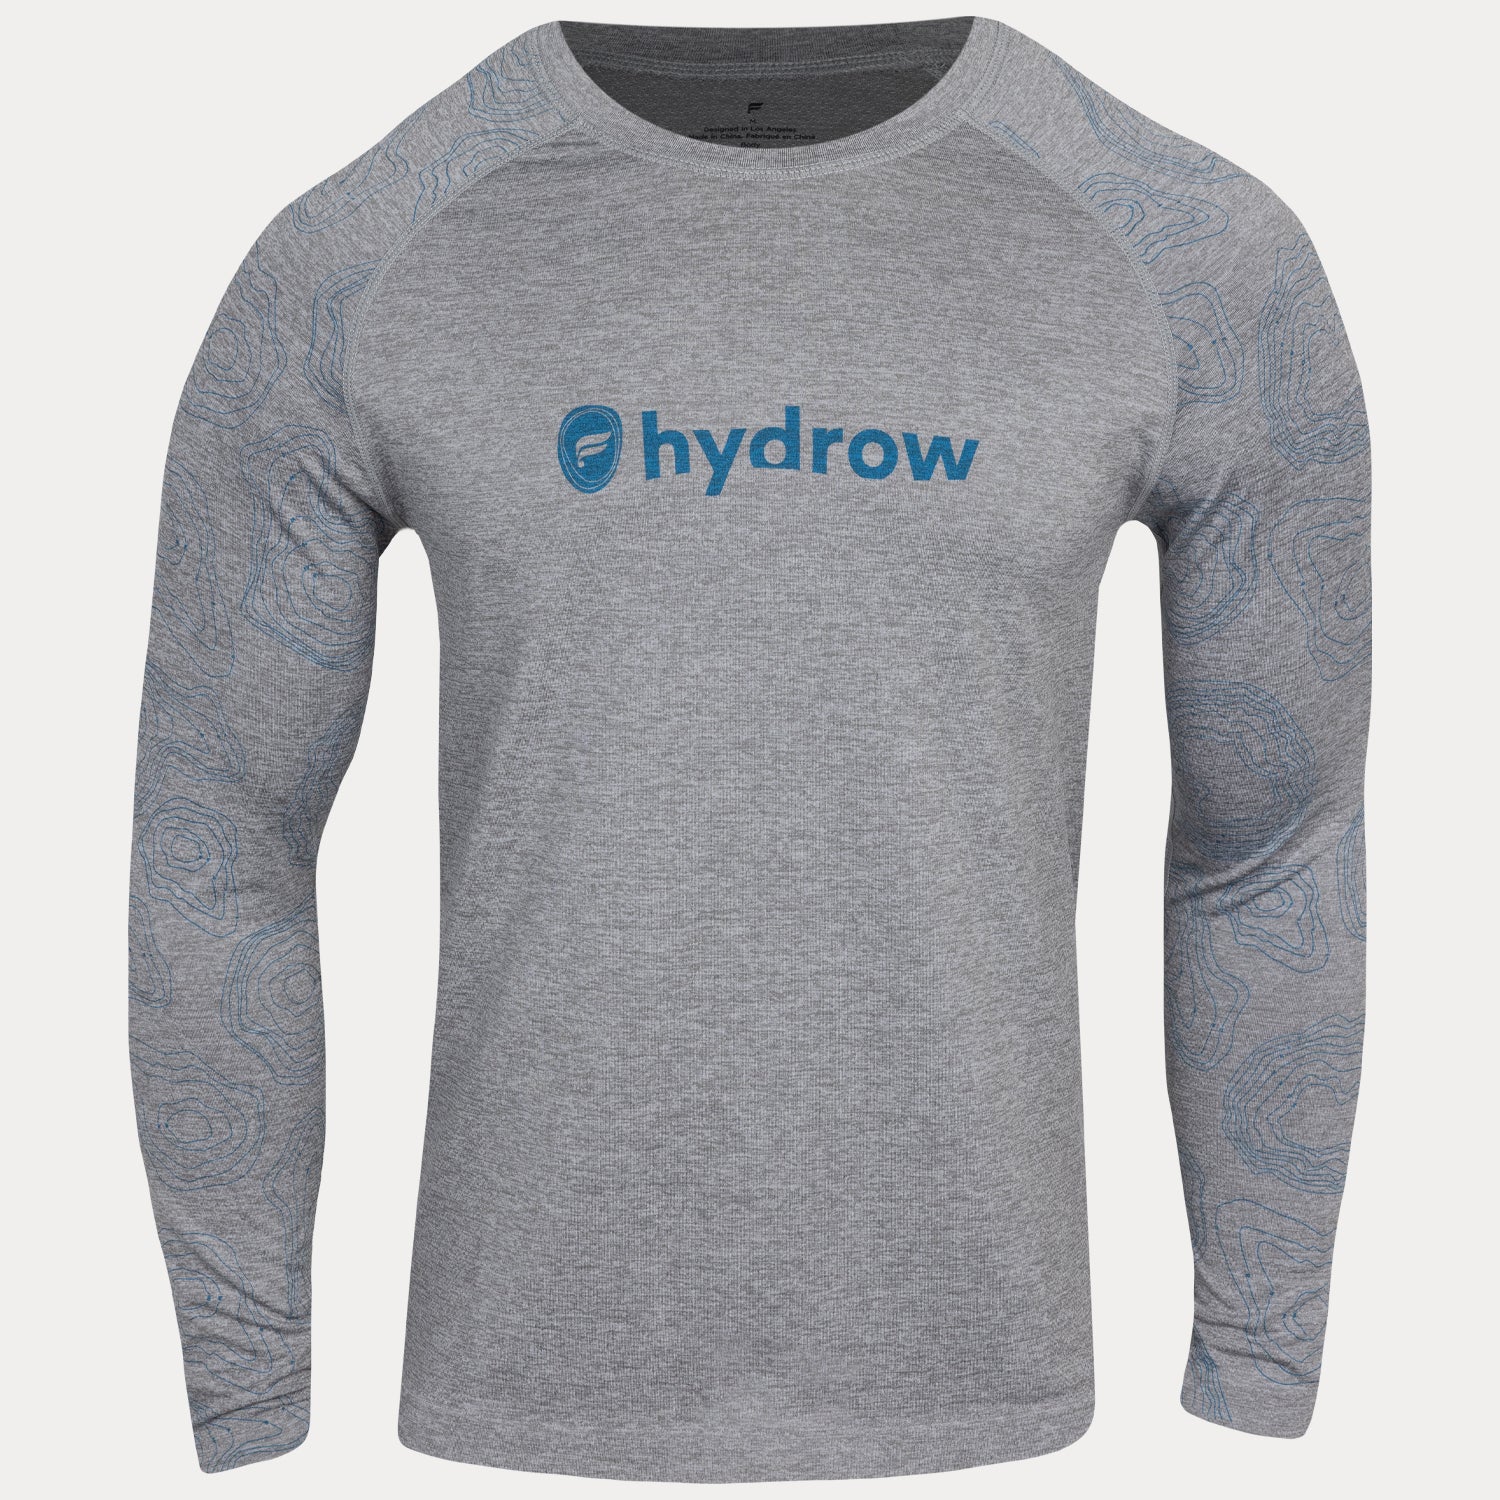 grey men's long sleeve shirt with dark blue Fabletics and hydrow logo on front